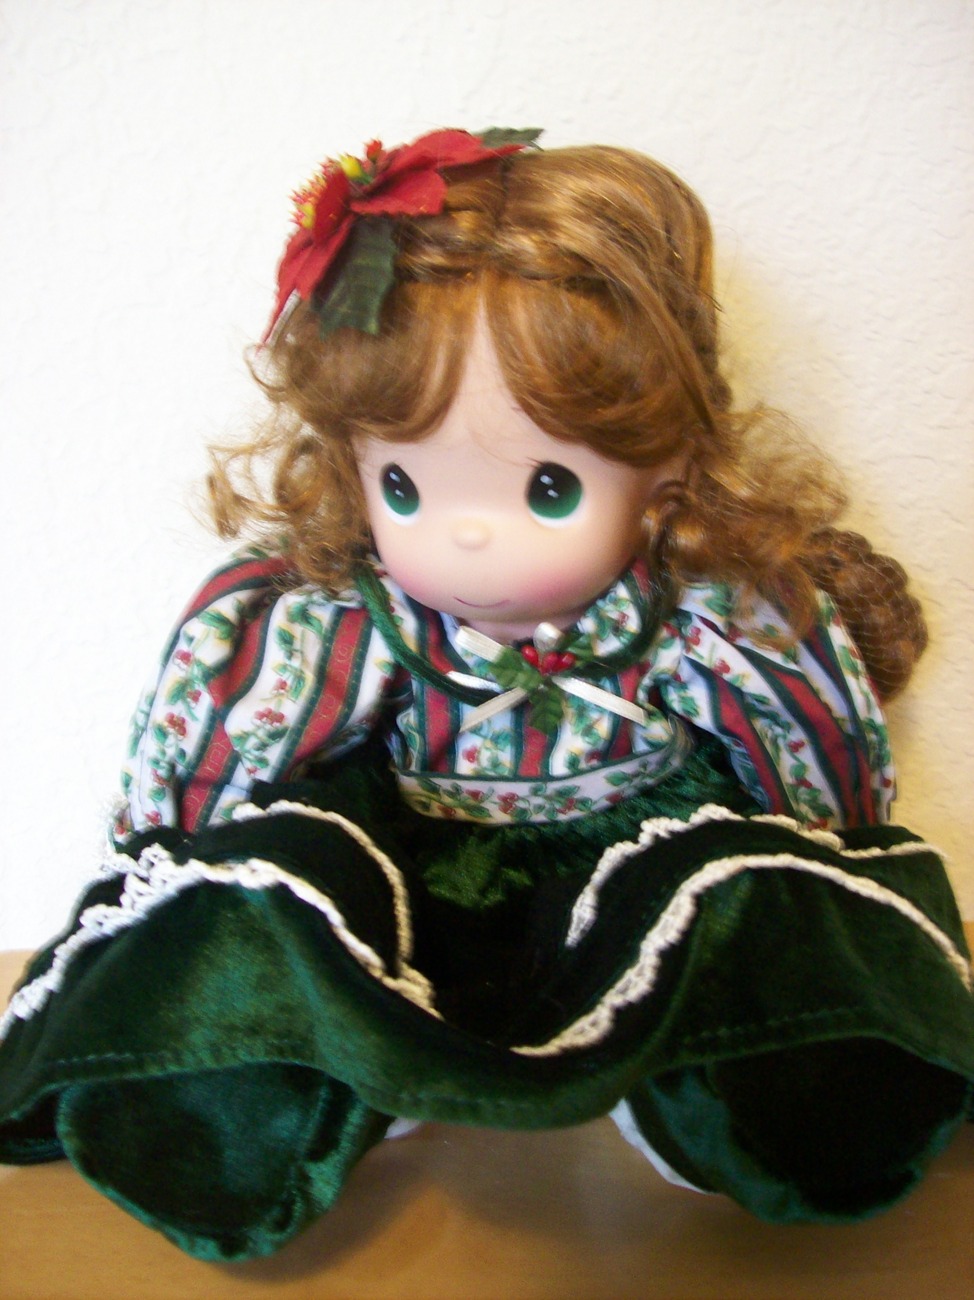 2004 Precious Moments Belle Christmas Stocking Doll  - $85.00